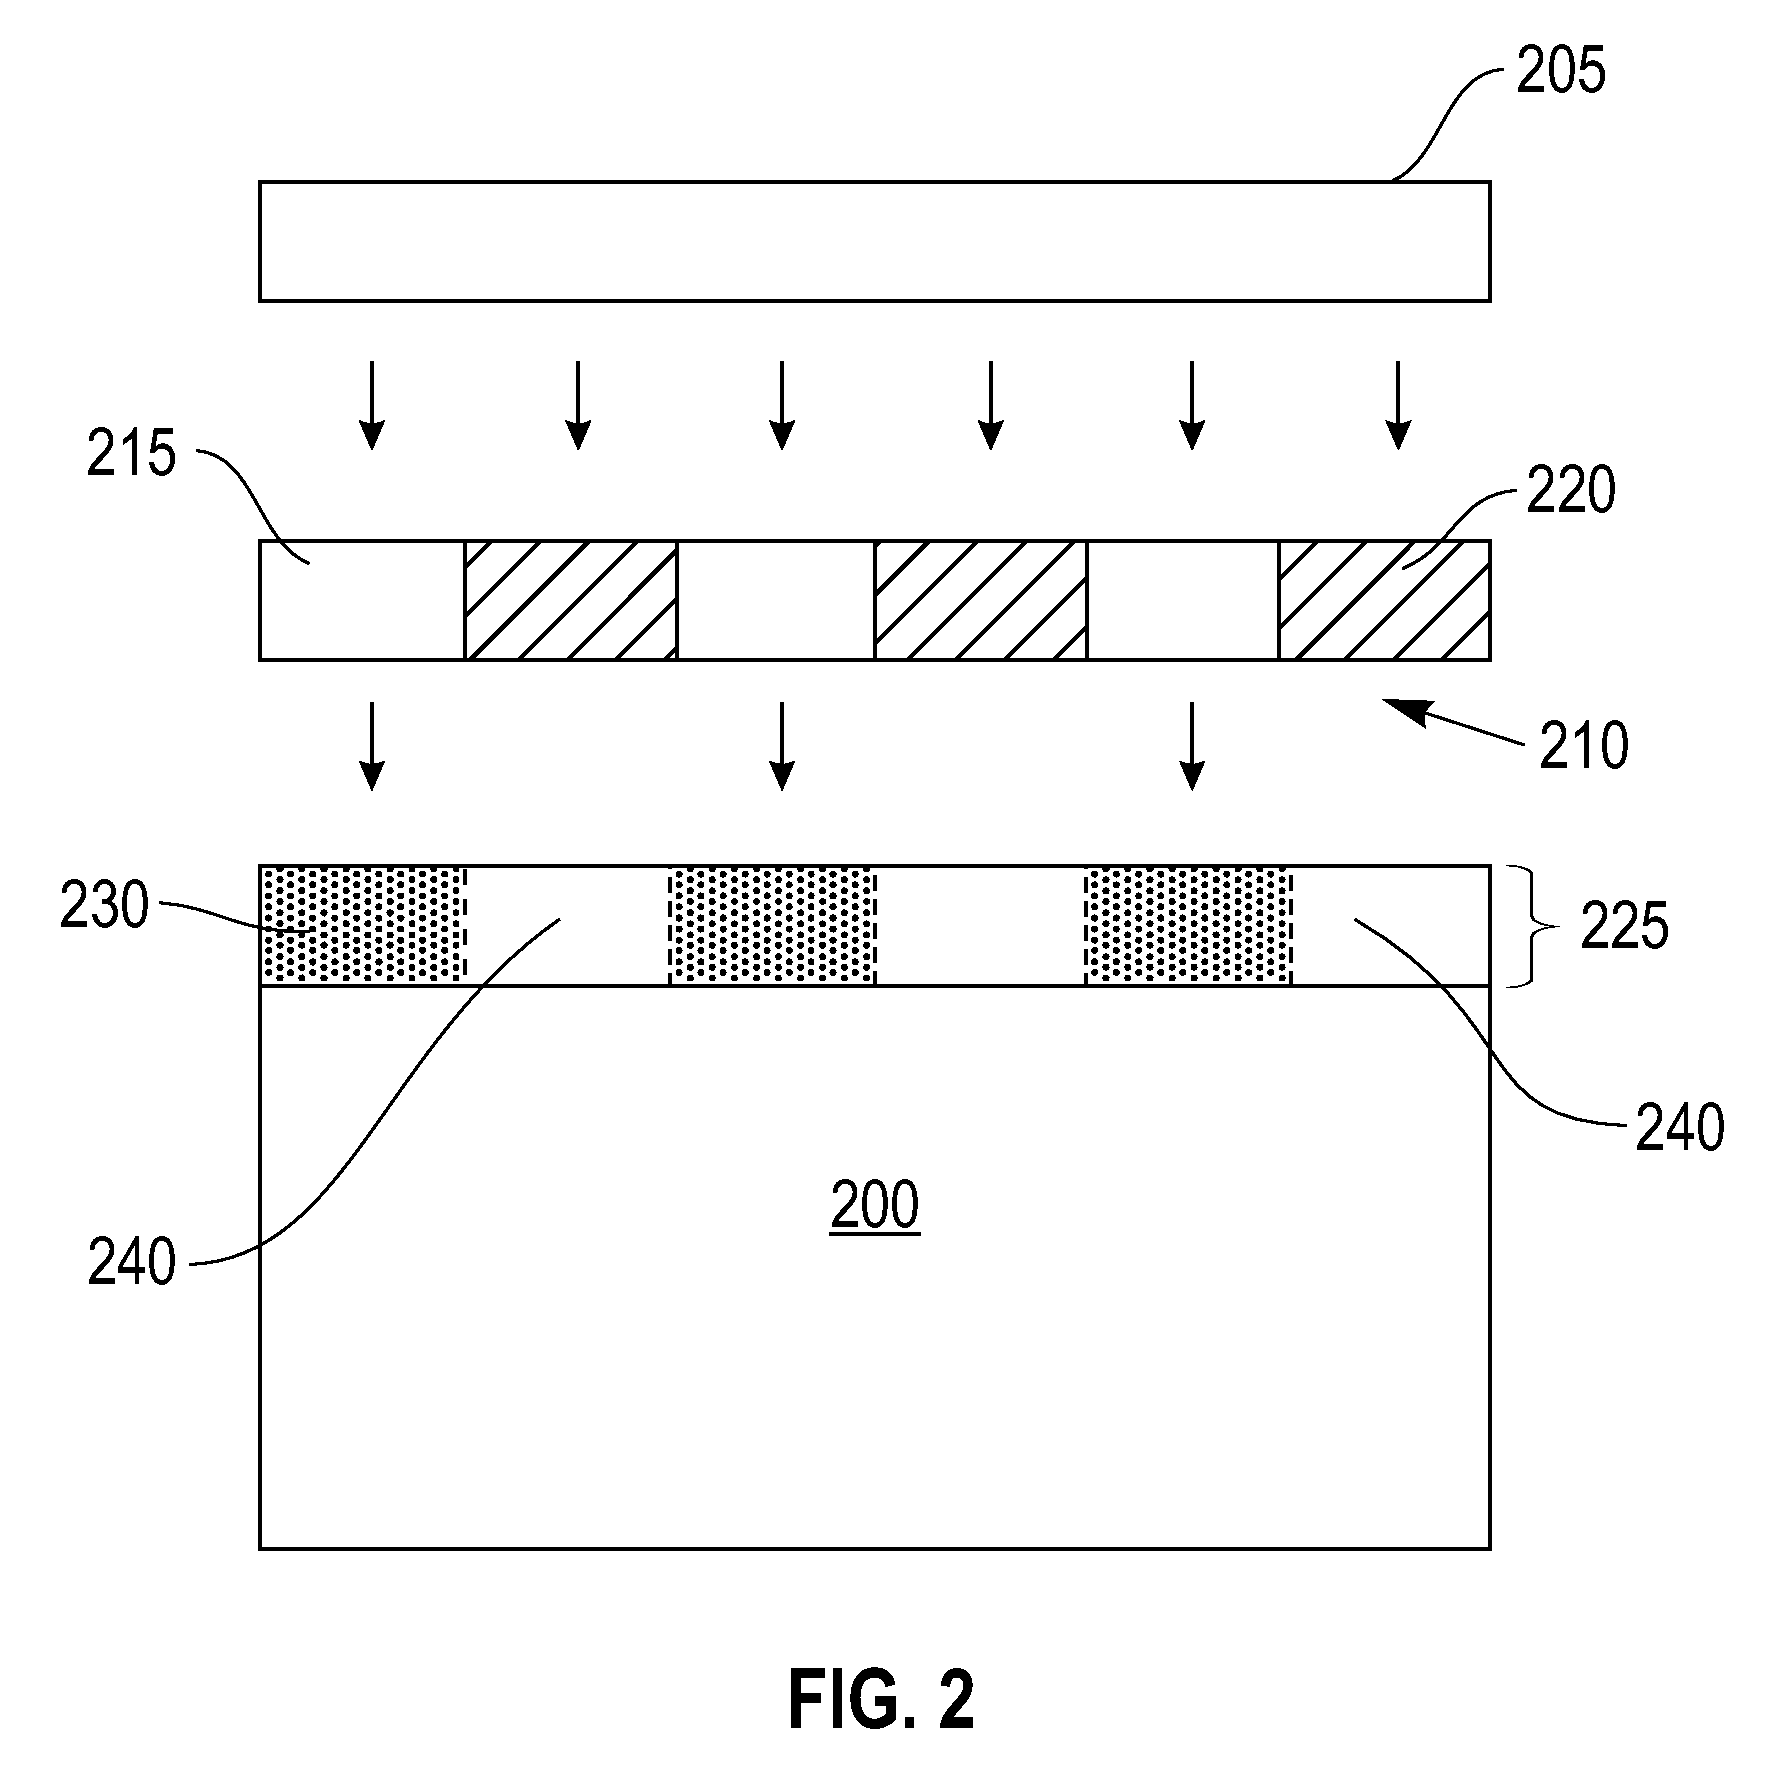 Photopatternable dielectric materials for beol applications and methods for use